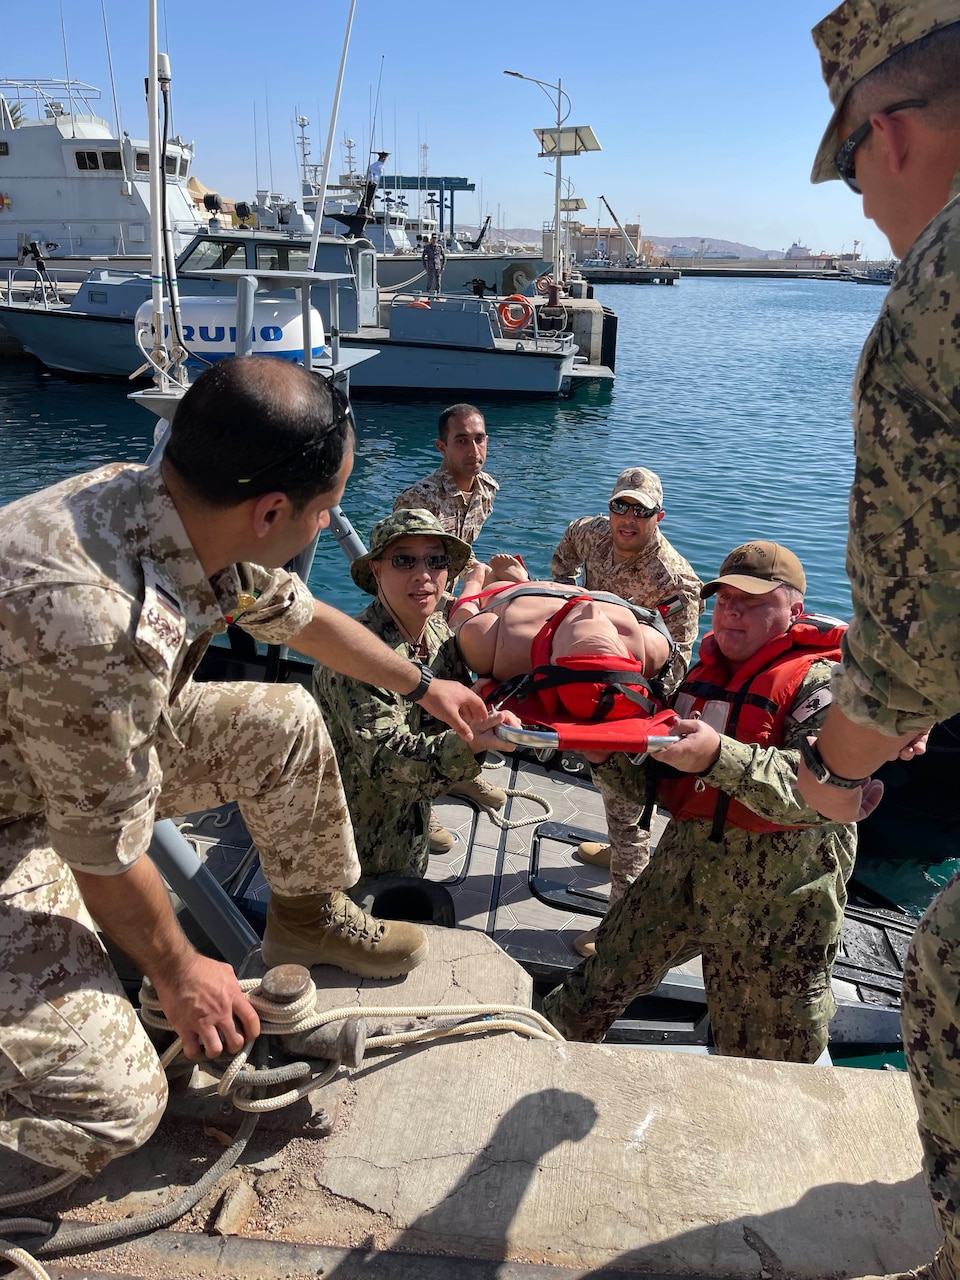 Capt. Jack Tsao, commanding officer of U.S. Navy Central Command’s Navy Reserve medical unit, and Hospital Corpsman Senior Chief Matthew Watton, of NAVCENT’s active staff, with assistance from Jordanian and U.S. service members, carry a simulated medical casualty to shore on March 12, 2023 at the Royal Jordanian Navy Base in Aqaba, Jordan, during International Maritime Exercise/Cutlass Express 2023. IMX/CE 2023 is the largest multinational training event in the Middle East, involving 7,000 personnel from more than 50 nations and international organizations committed to preserving the rules-based international order and strengthening regional maritime security cooperation. (U.S. Navy photo by Lt. Freddie Mawanay)